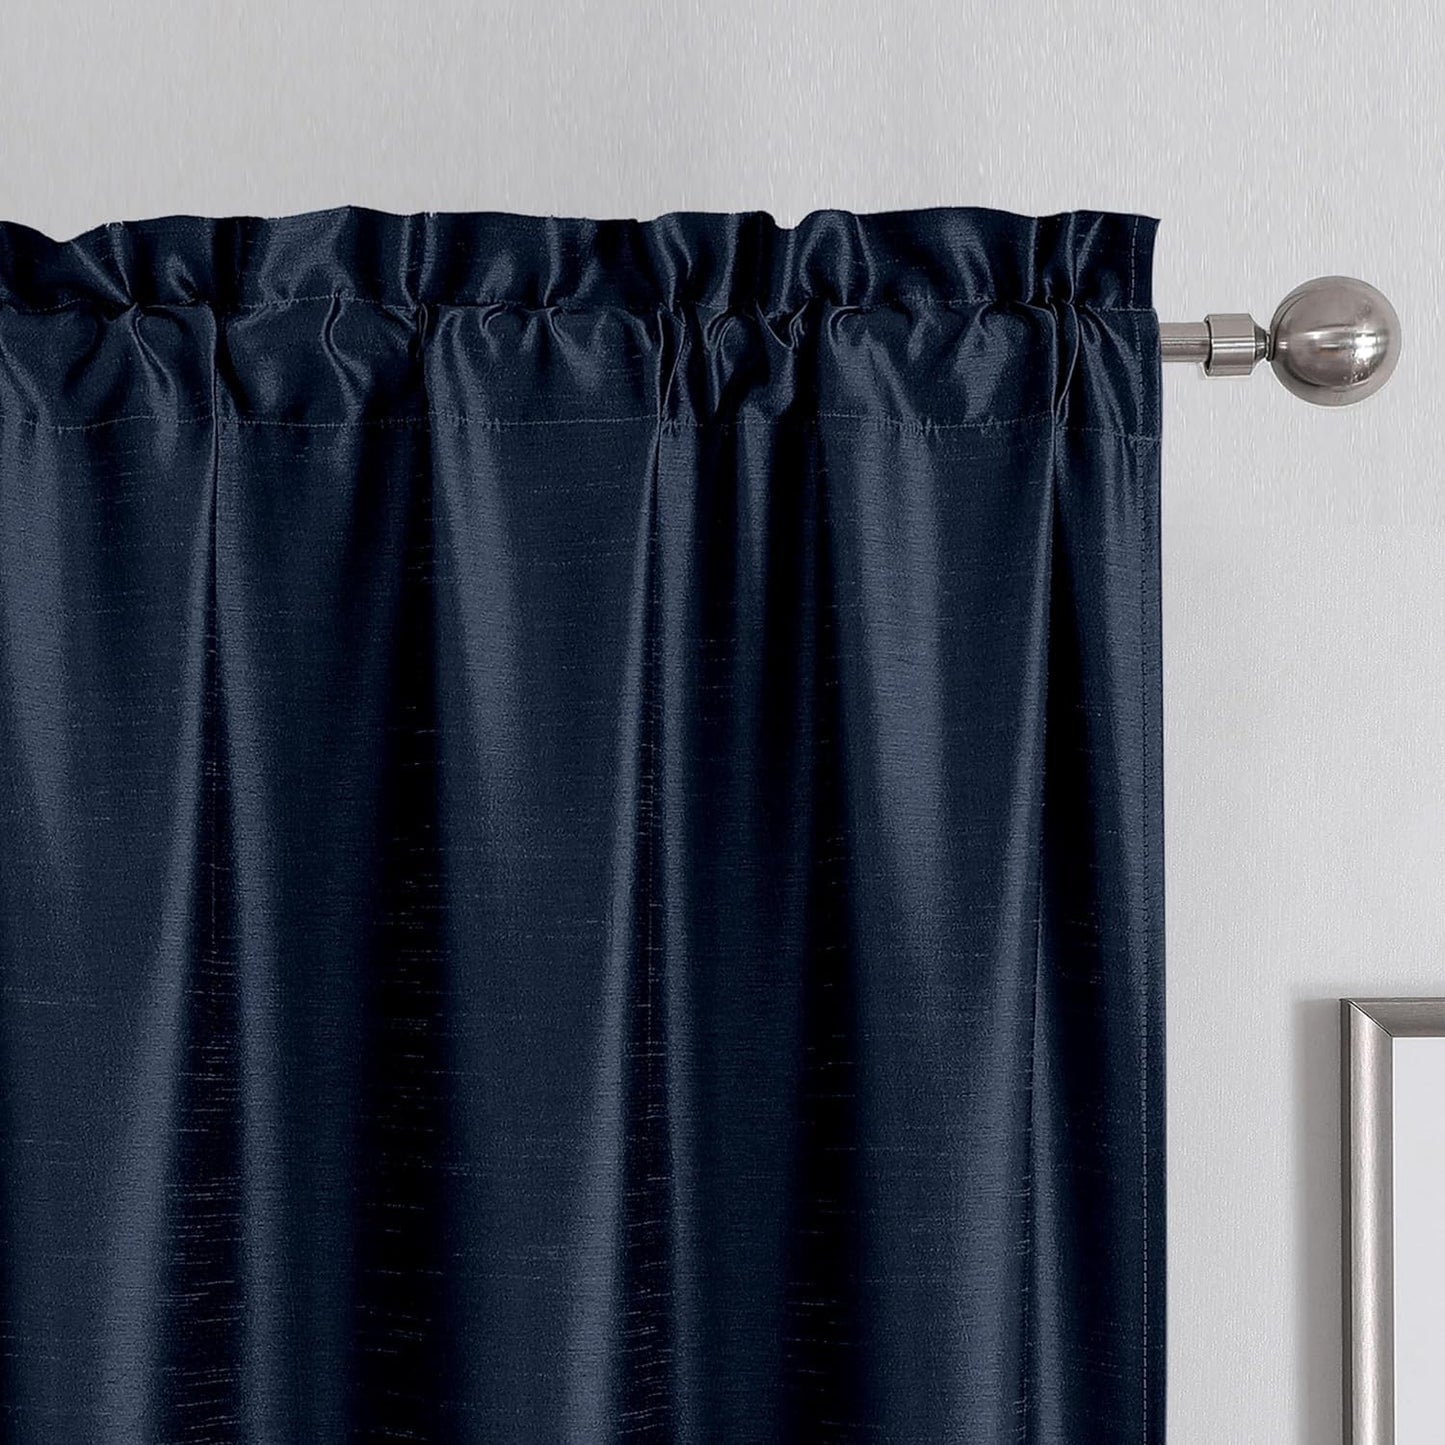 Chyhomenyc Uptown Sage Green Kitchen Curtains 45 Inch Length 2 Panels, Room Darkening Faux Silk Chic Fabric Short Window Curtains for Bedroom Living Room, Each 30Wx45L  Chyhomenyc Navy Blue 2X40"Wx72"L 